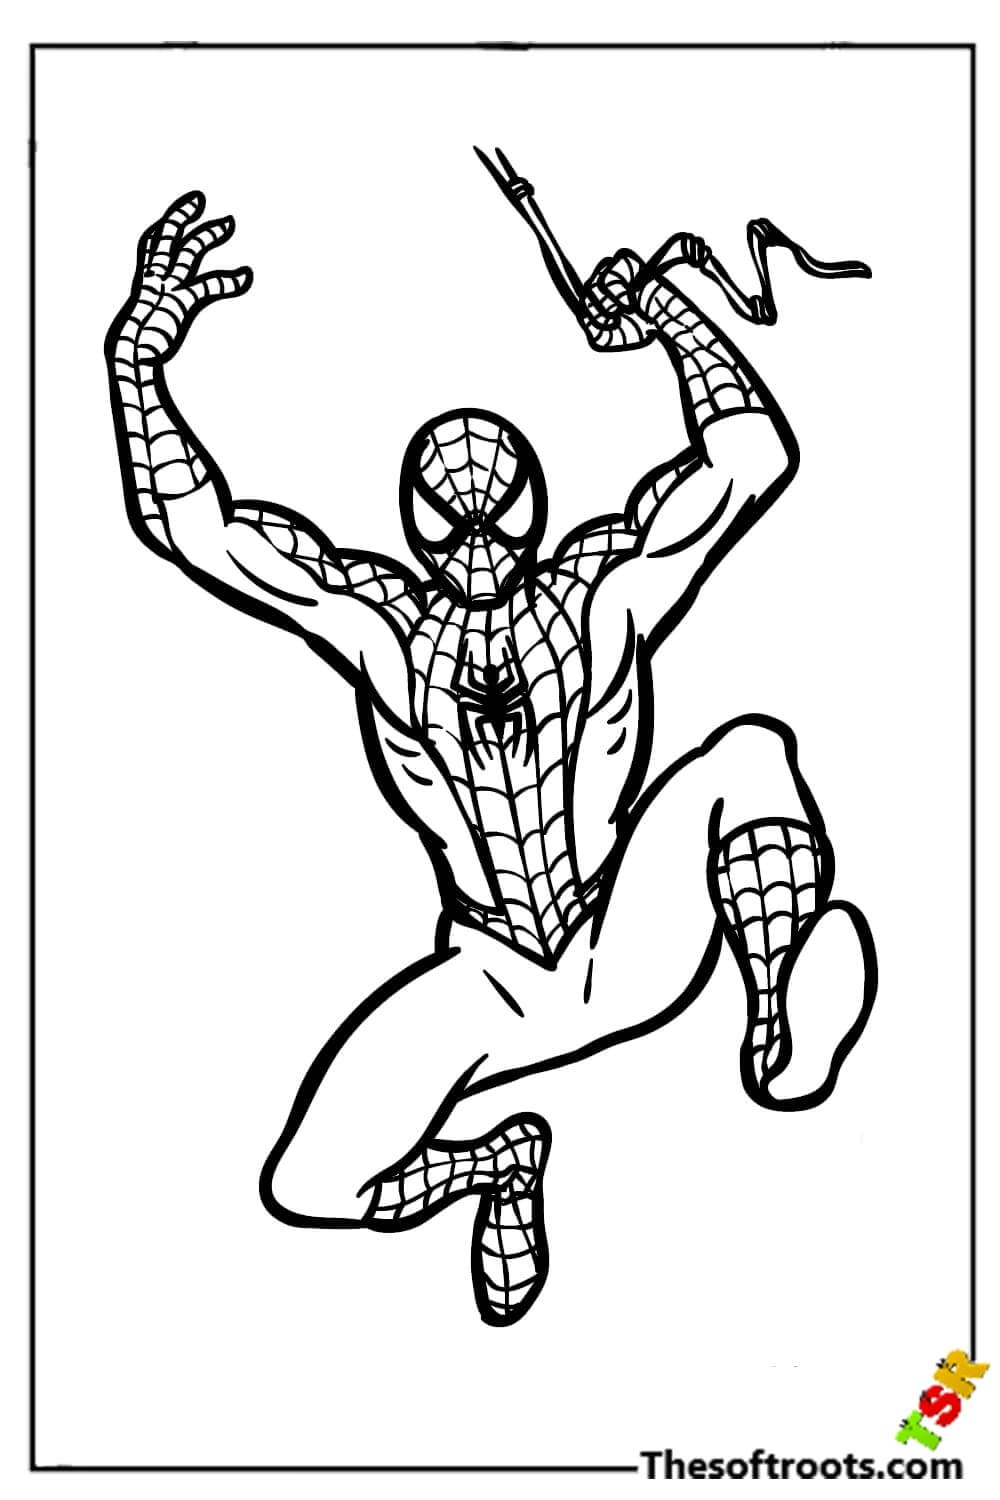 Beautiful Spiderman coloring pages